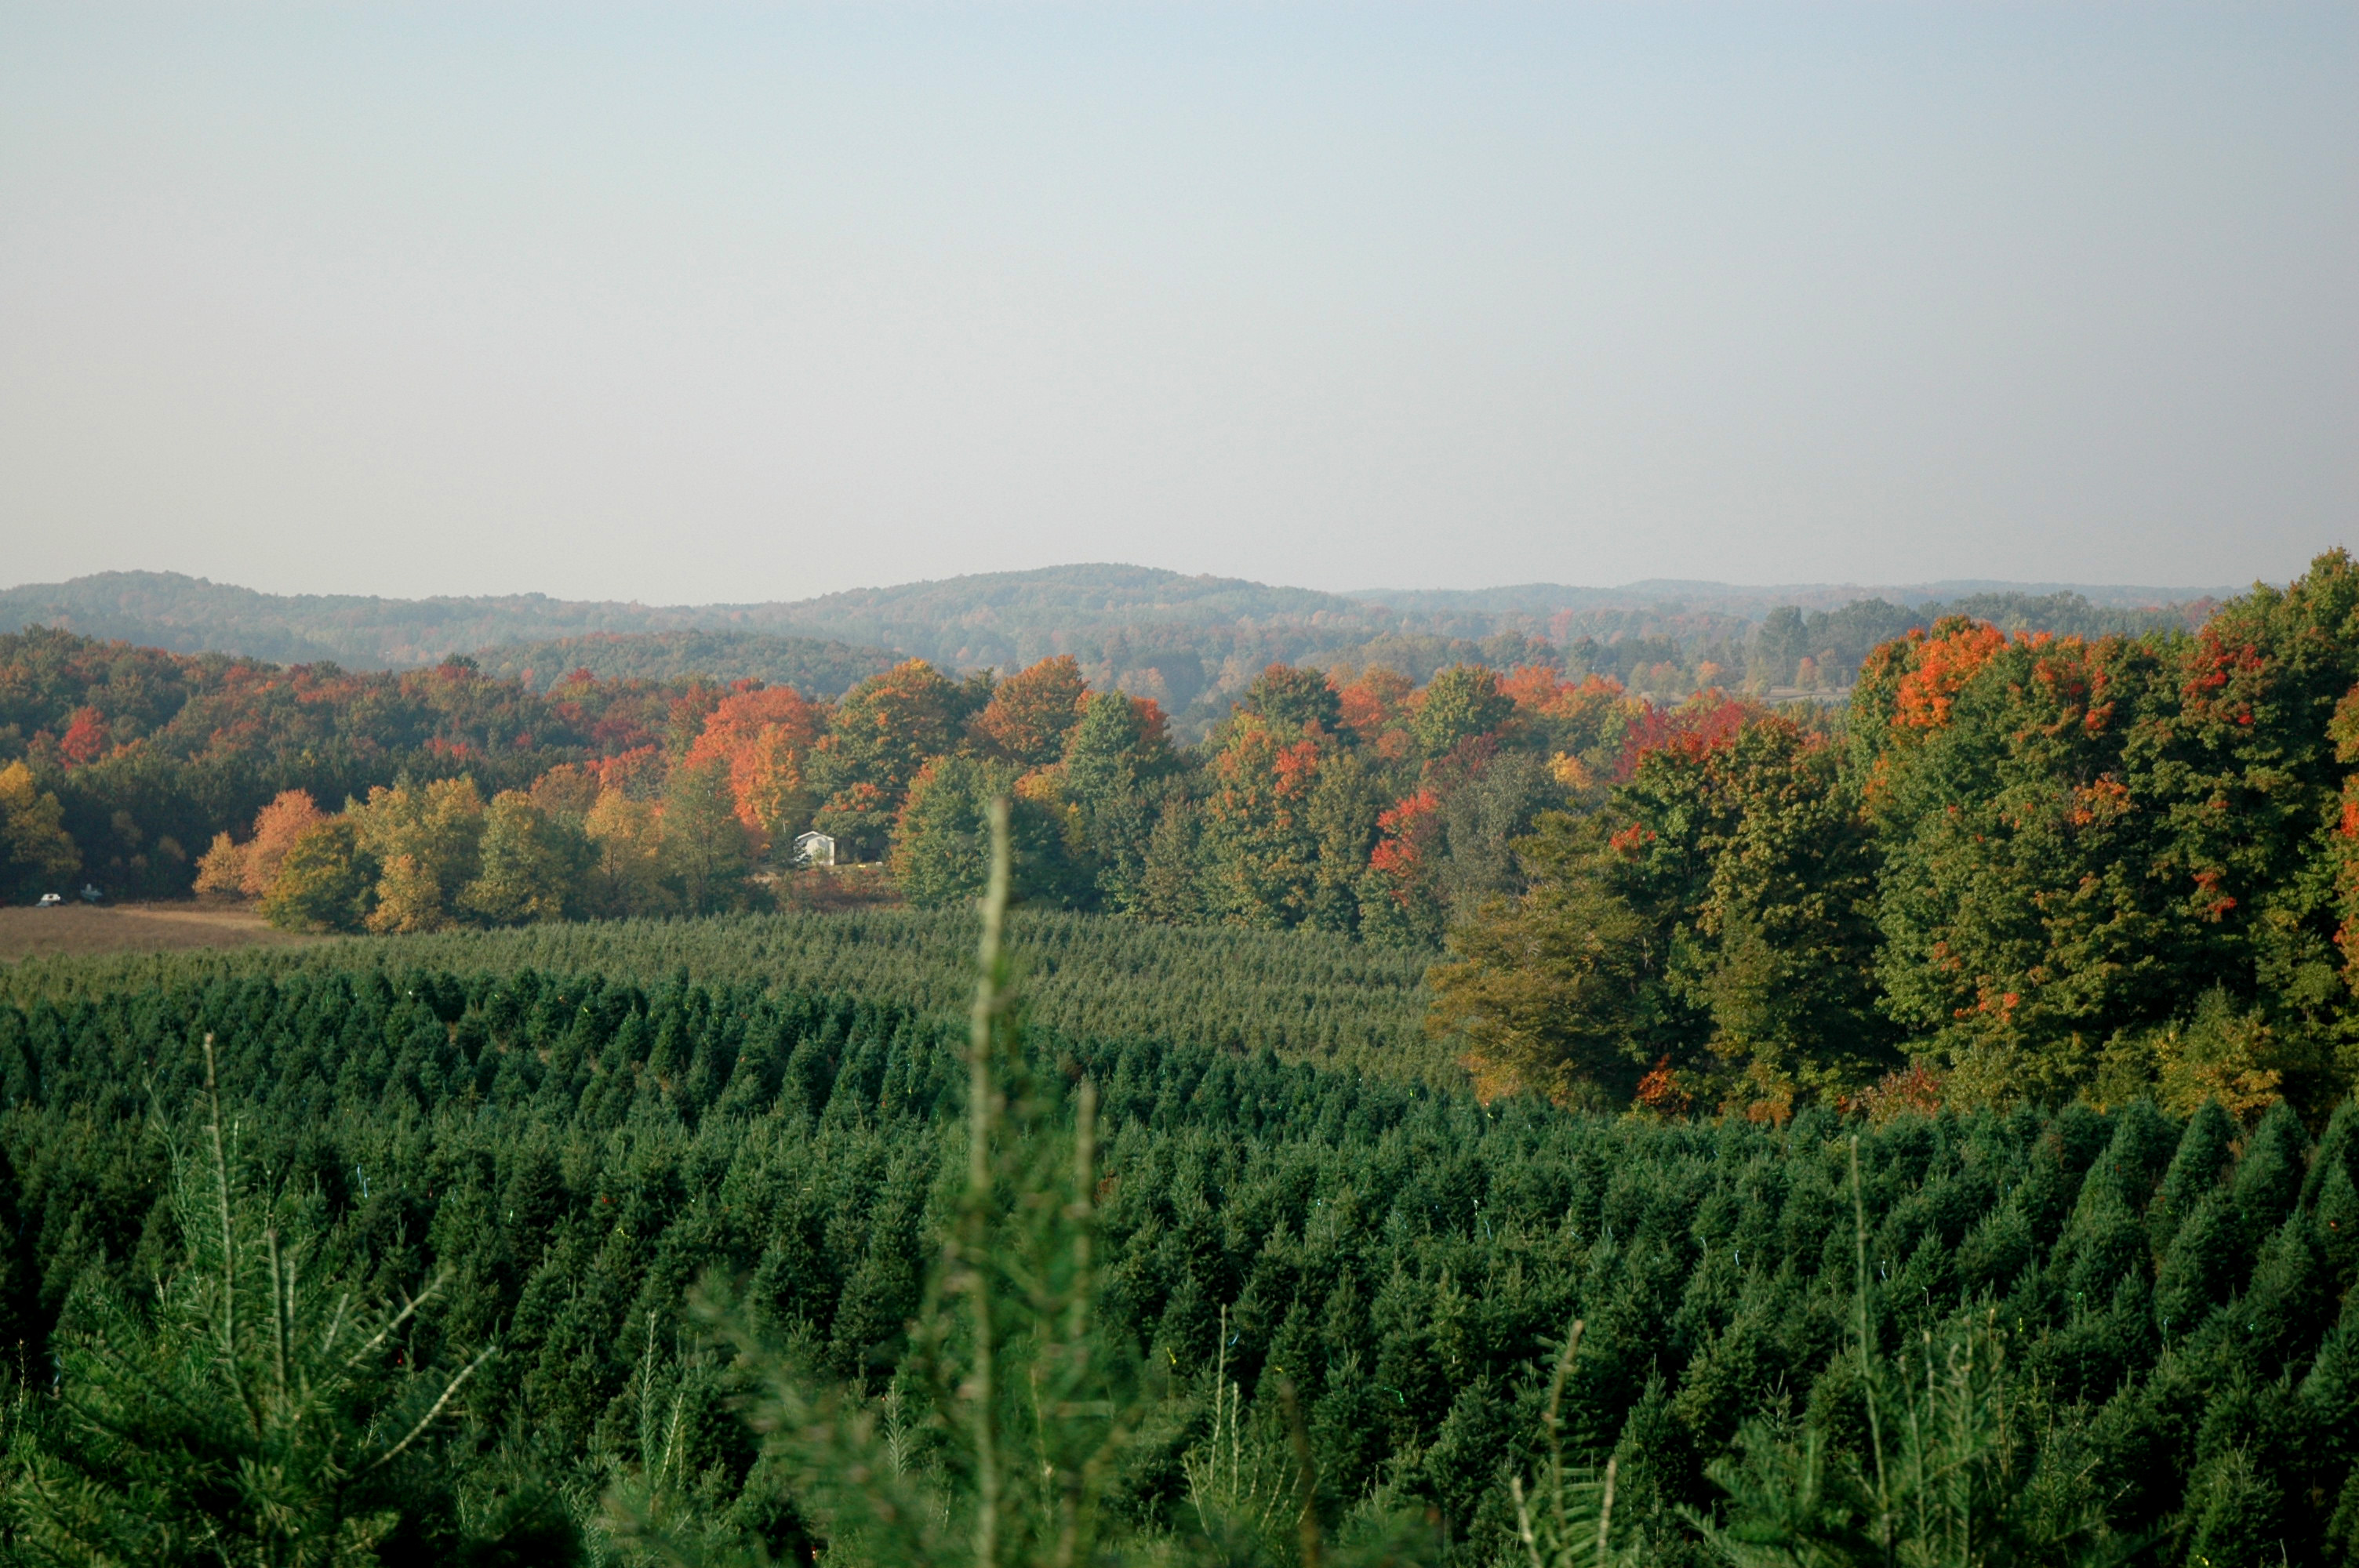 A field of evergreen Christmas trees